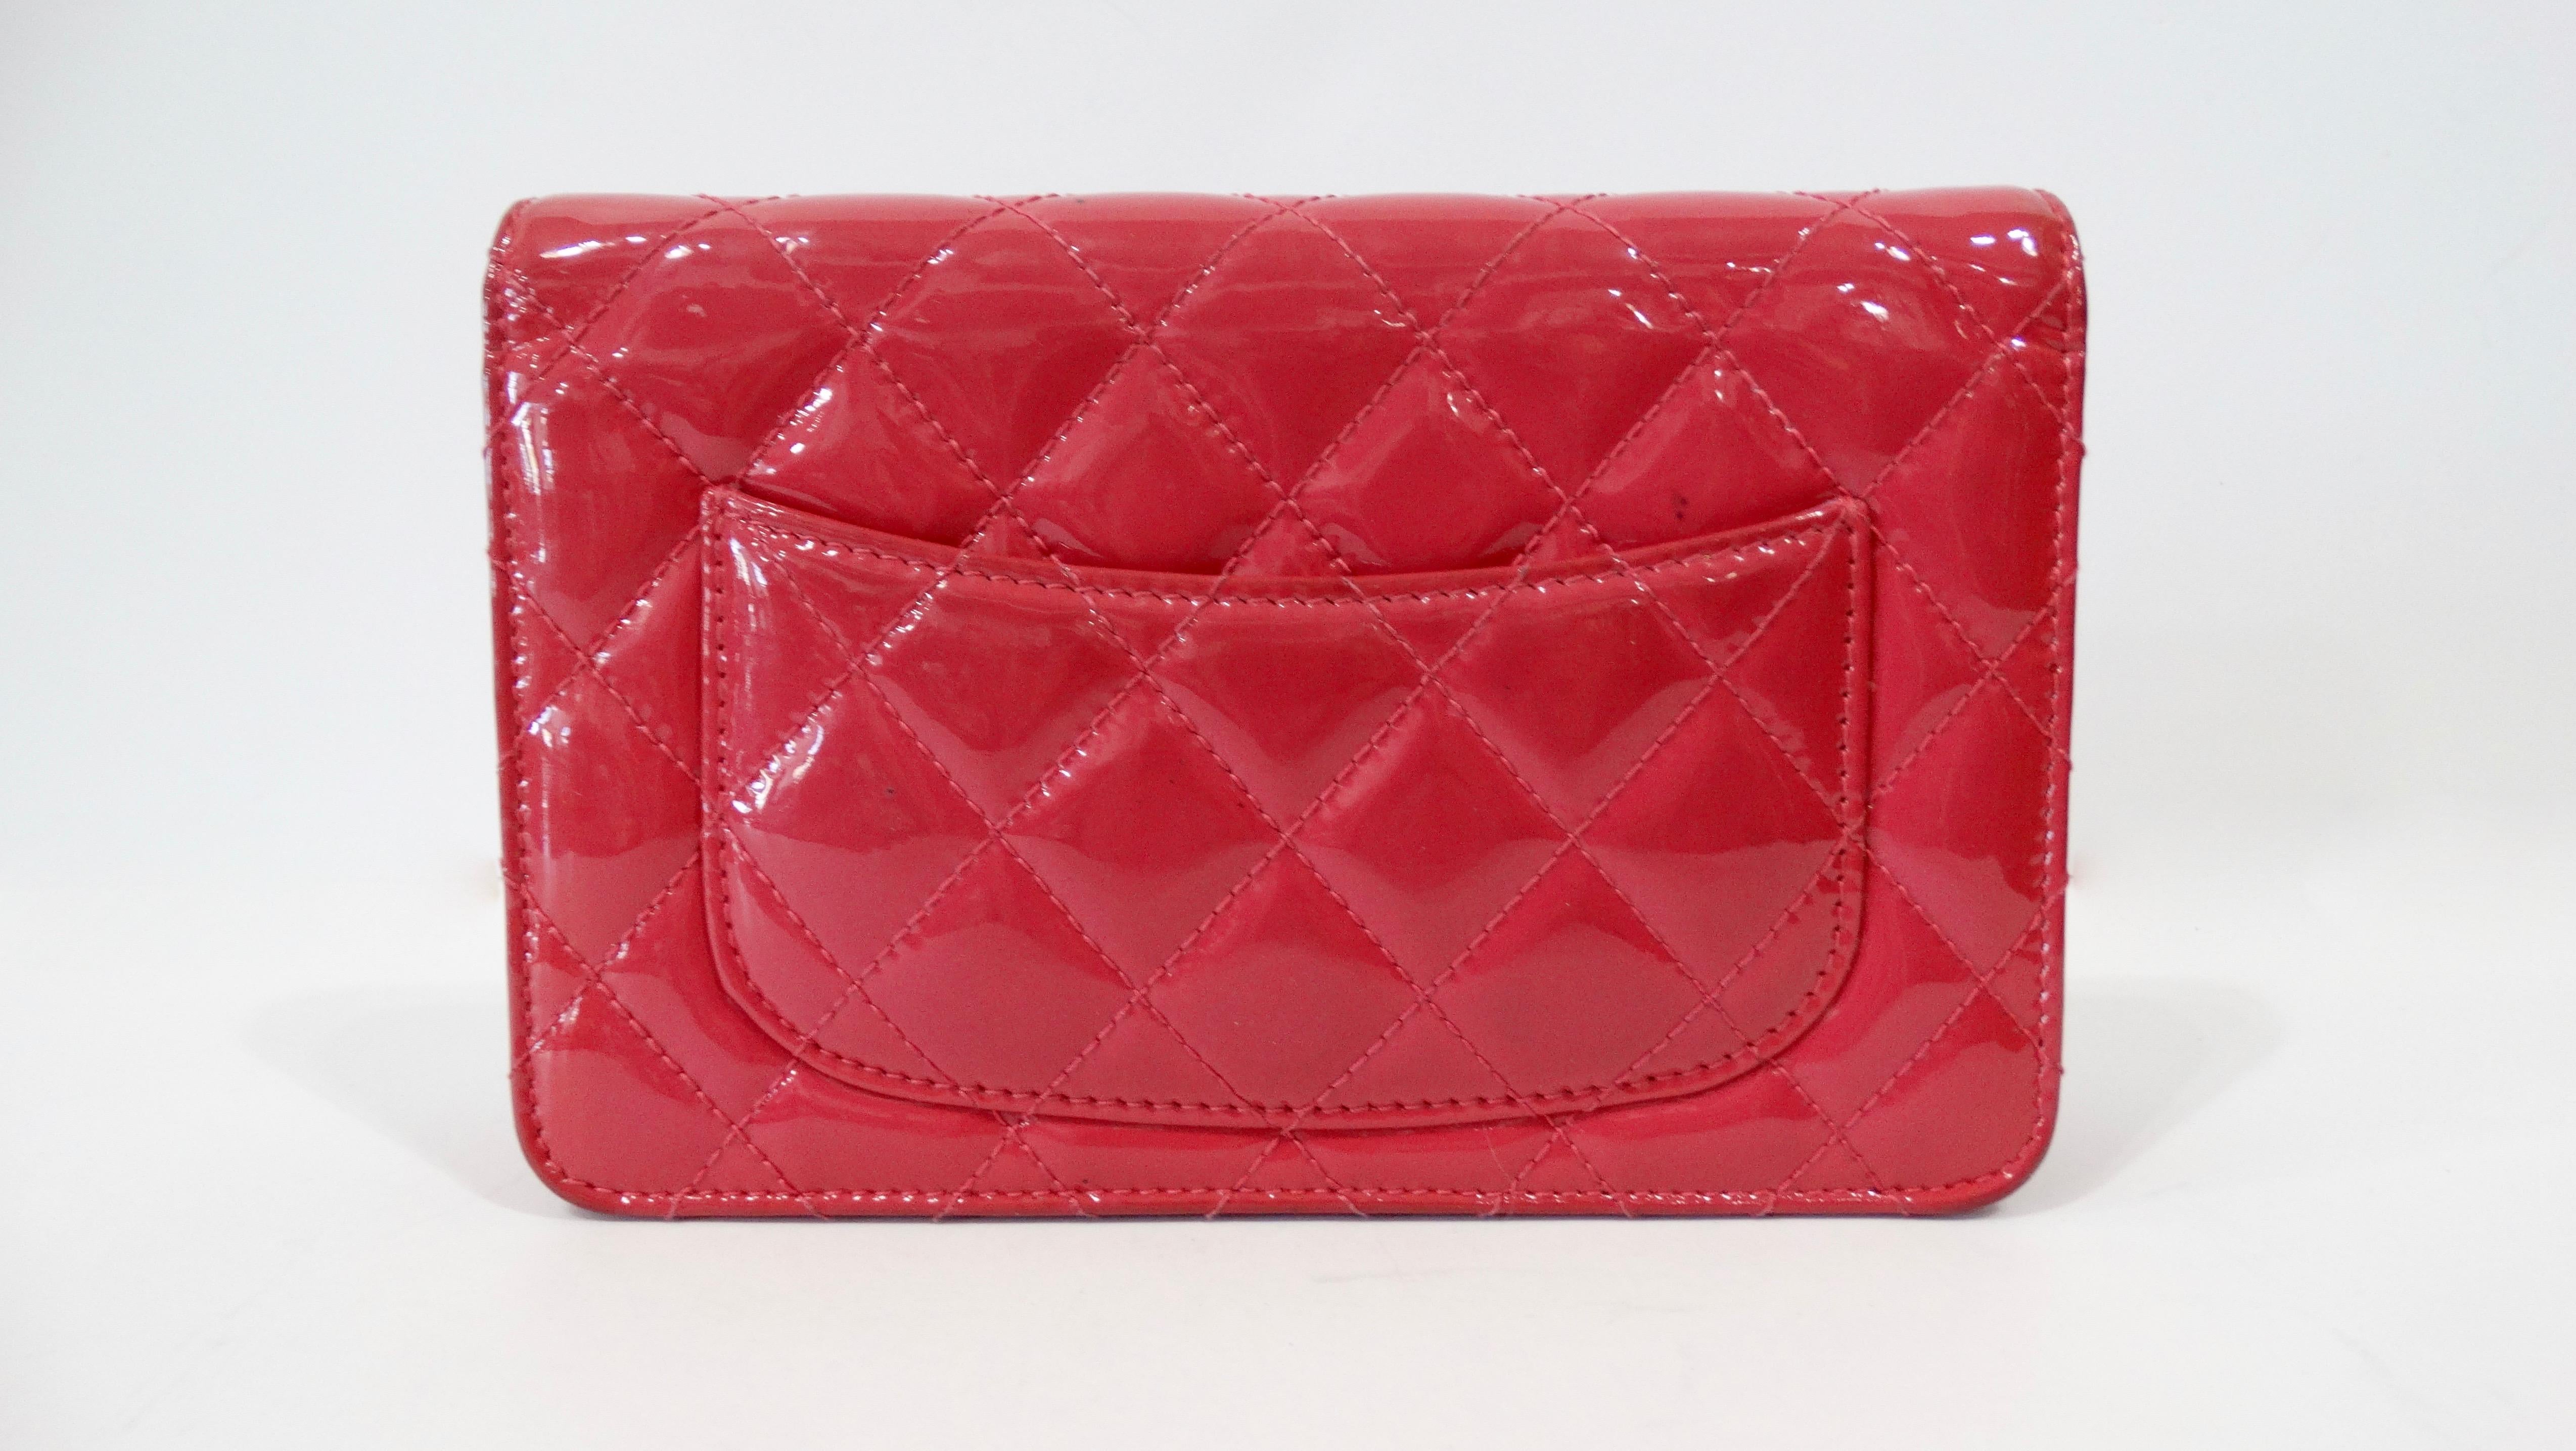 Women's or Men's Chanel 2014 Quilted Patent Leather Wallet Crossbody Bag 